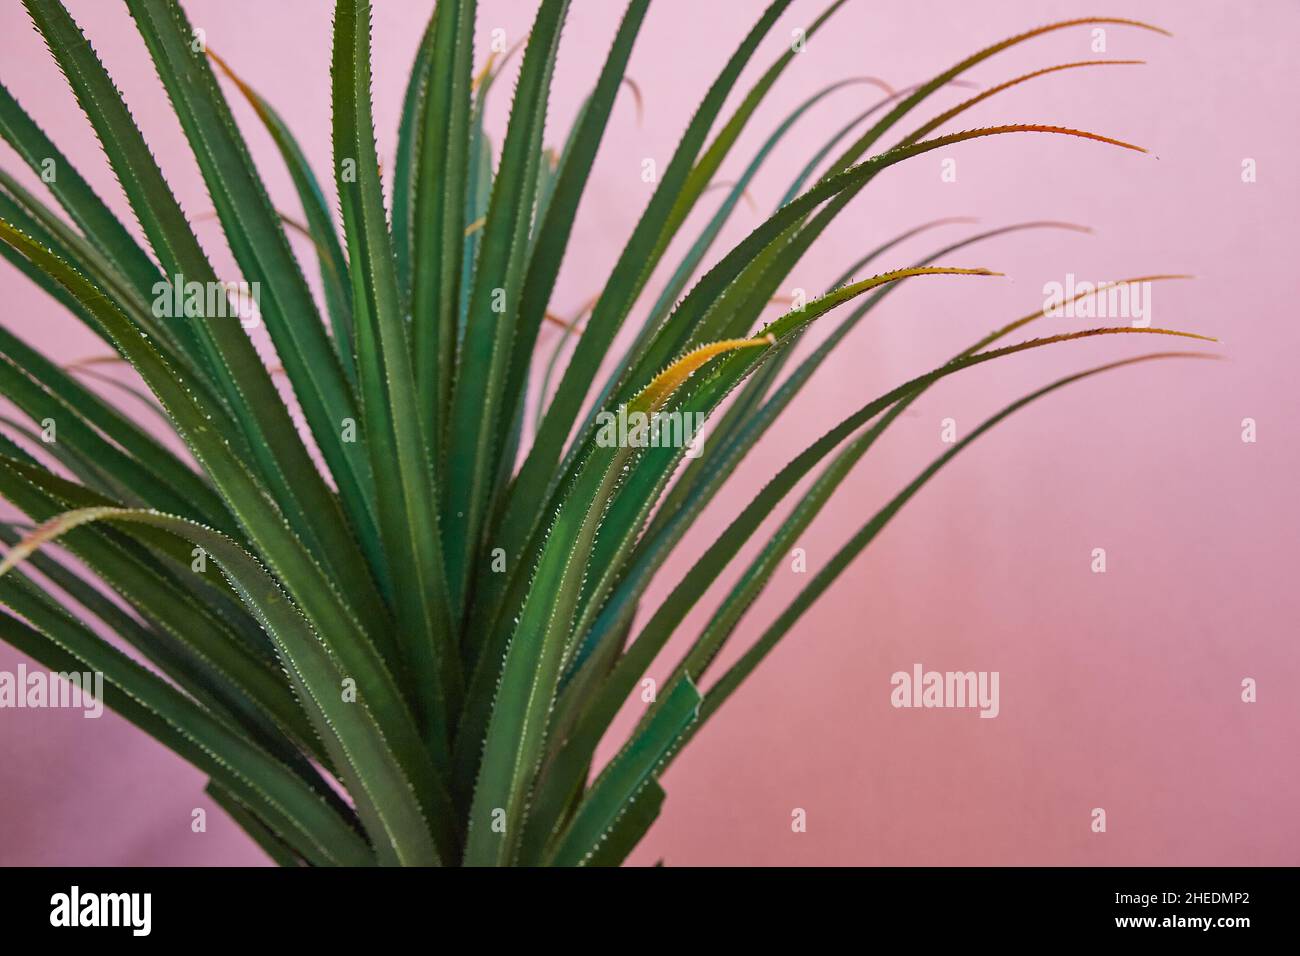 Prickly aloe in close-up on a pink background. Trendy tropical cacti concept. Stock Photo